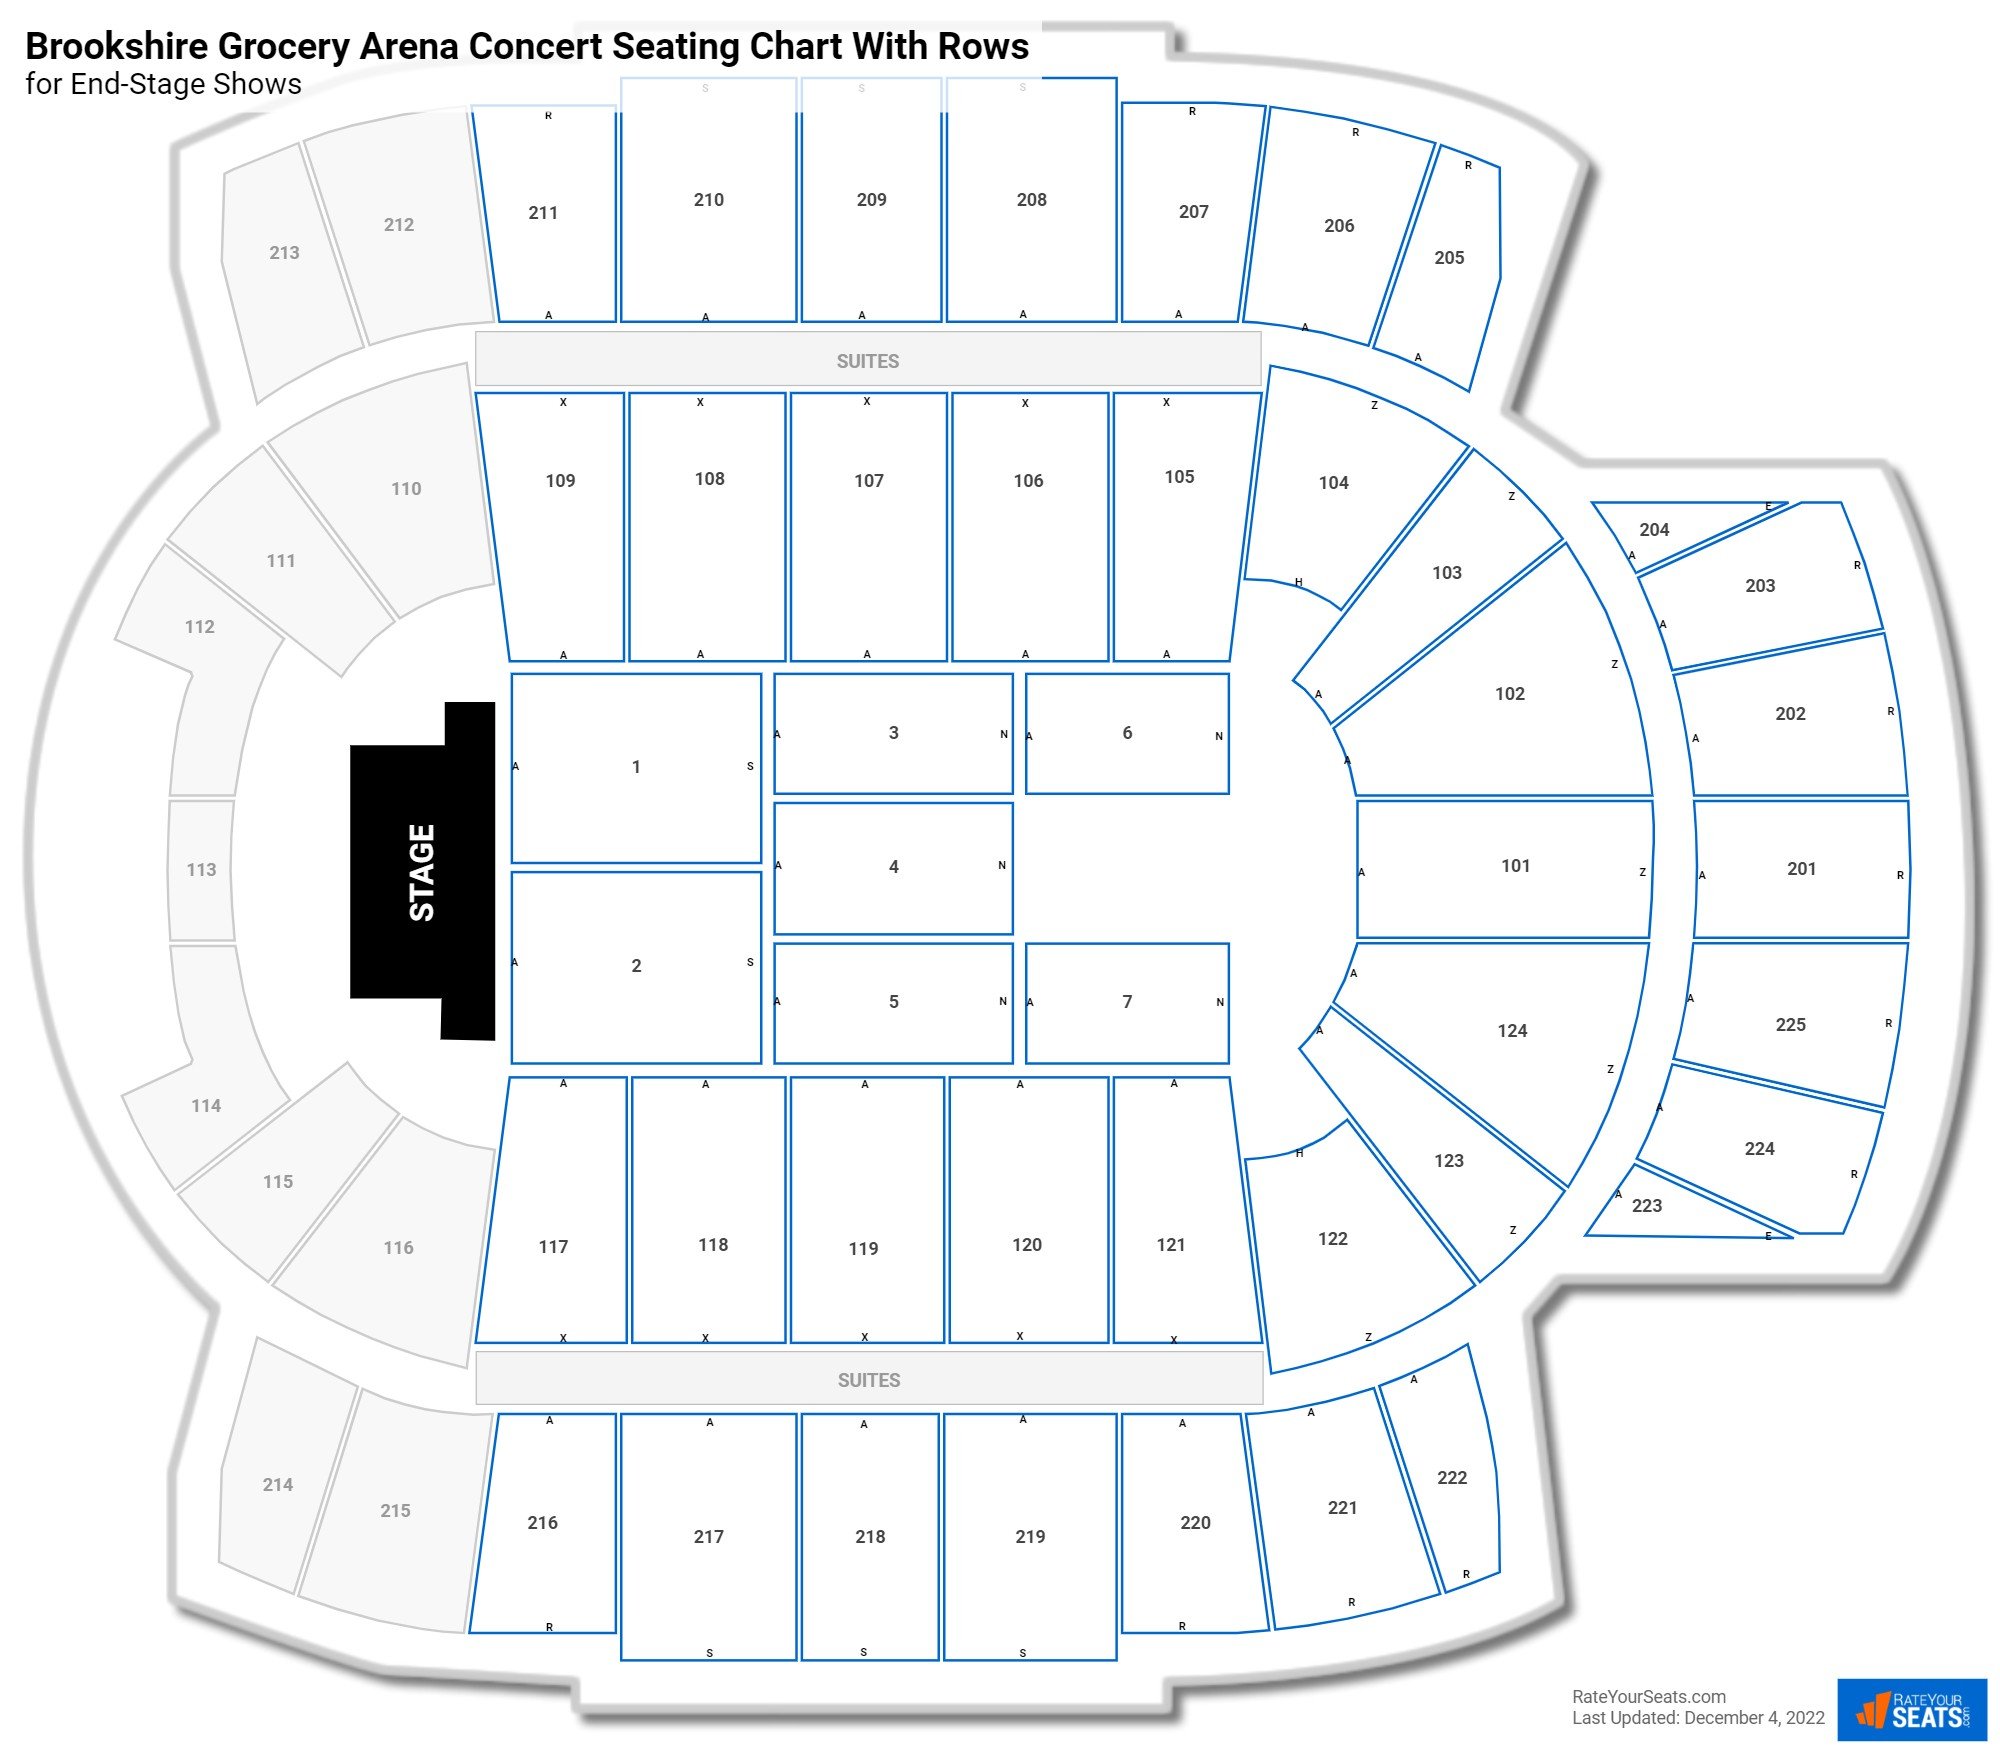 Brookshire Grocery Arena seating chart with row numbers